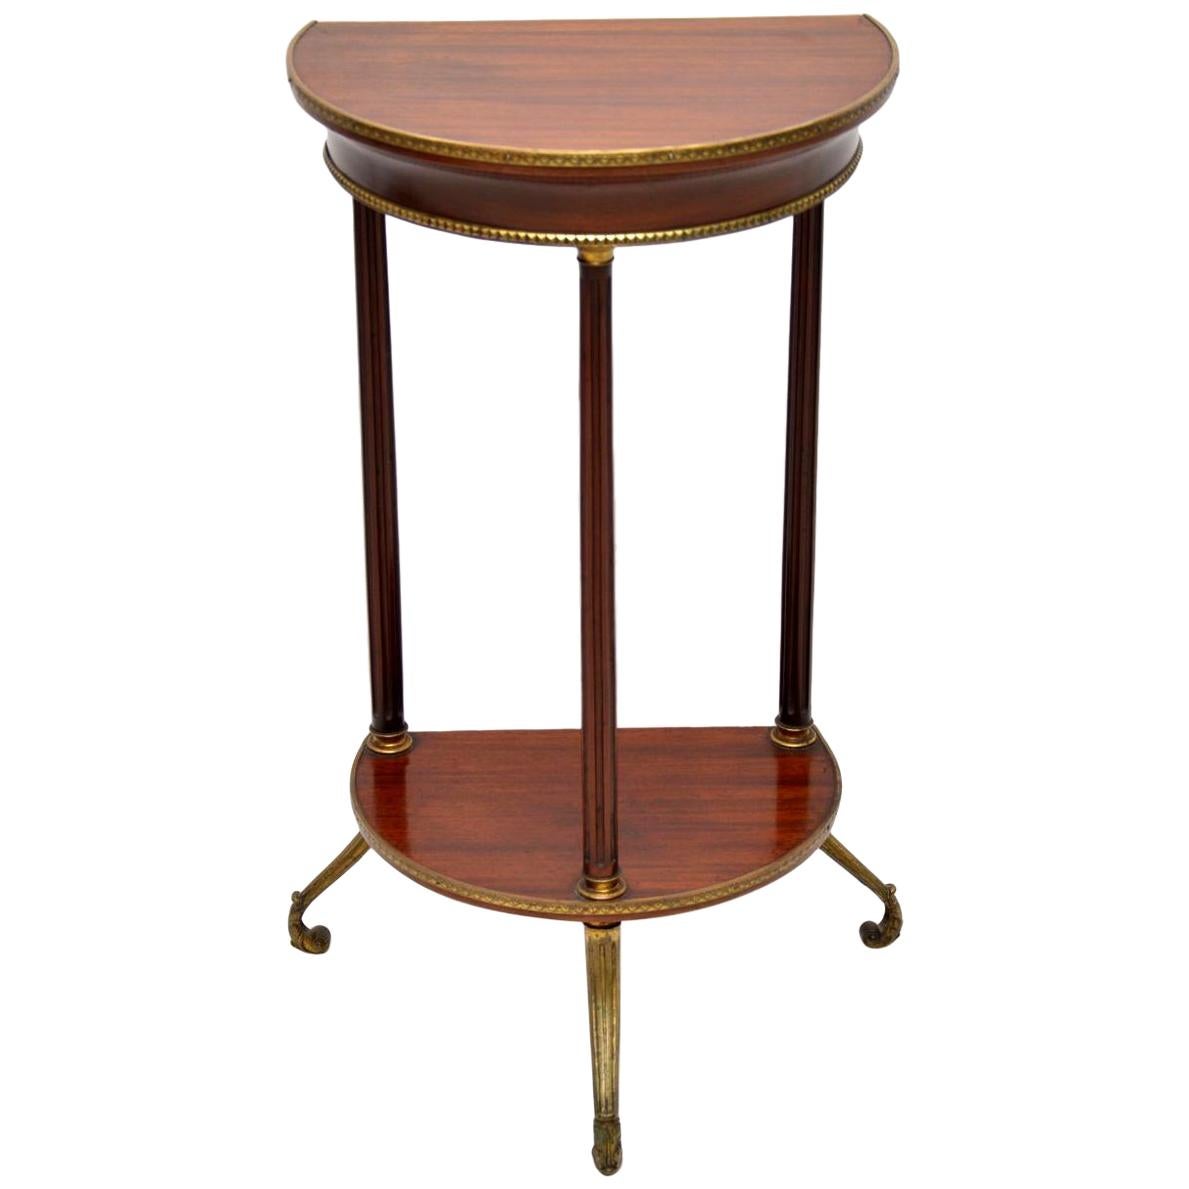 Antique Mahogany and Brass Side Table